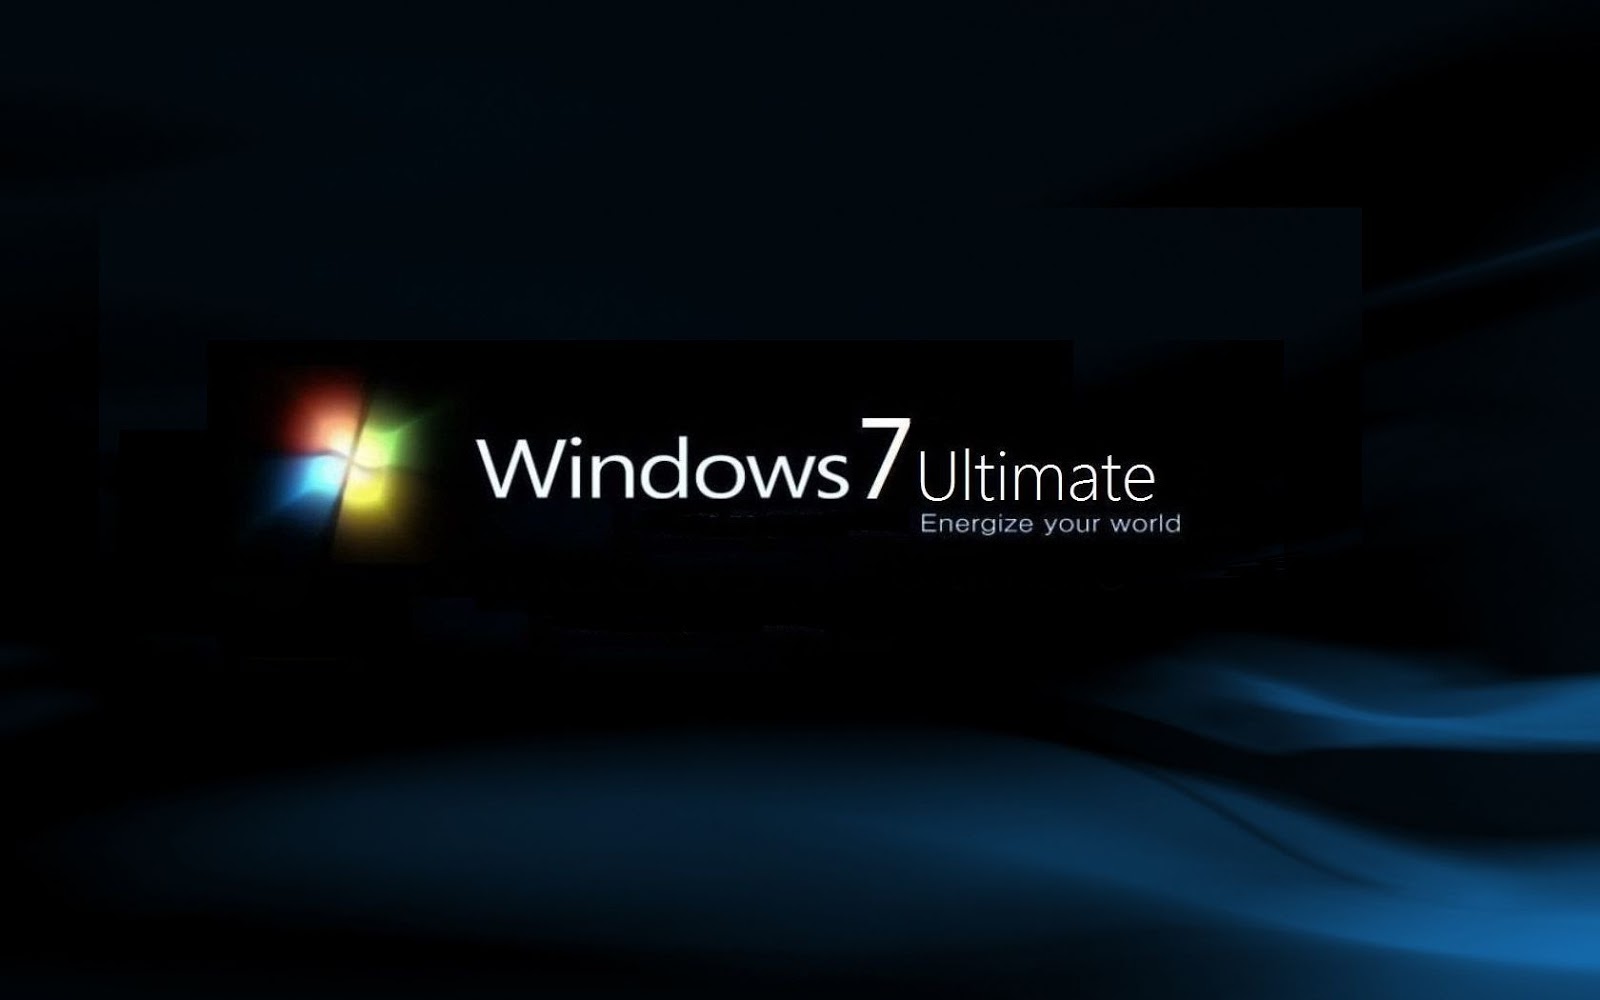 Windows 7 Ultimate ISO Download Free Full Version 